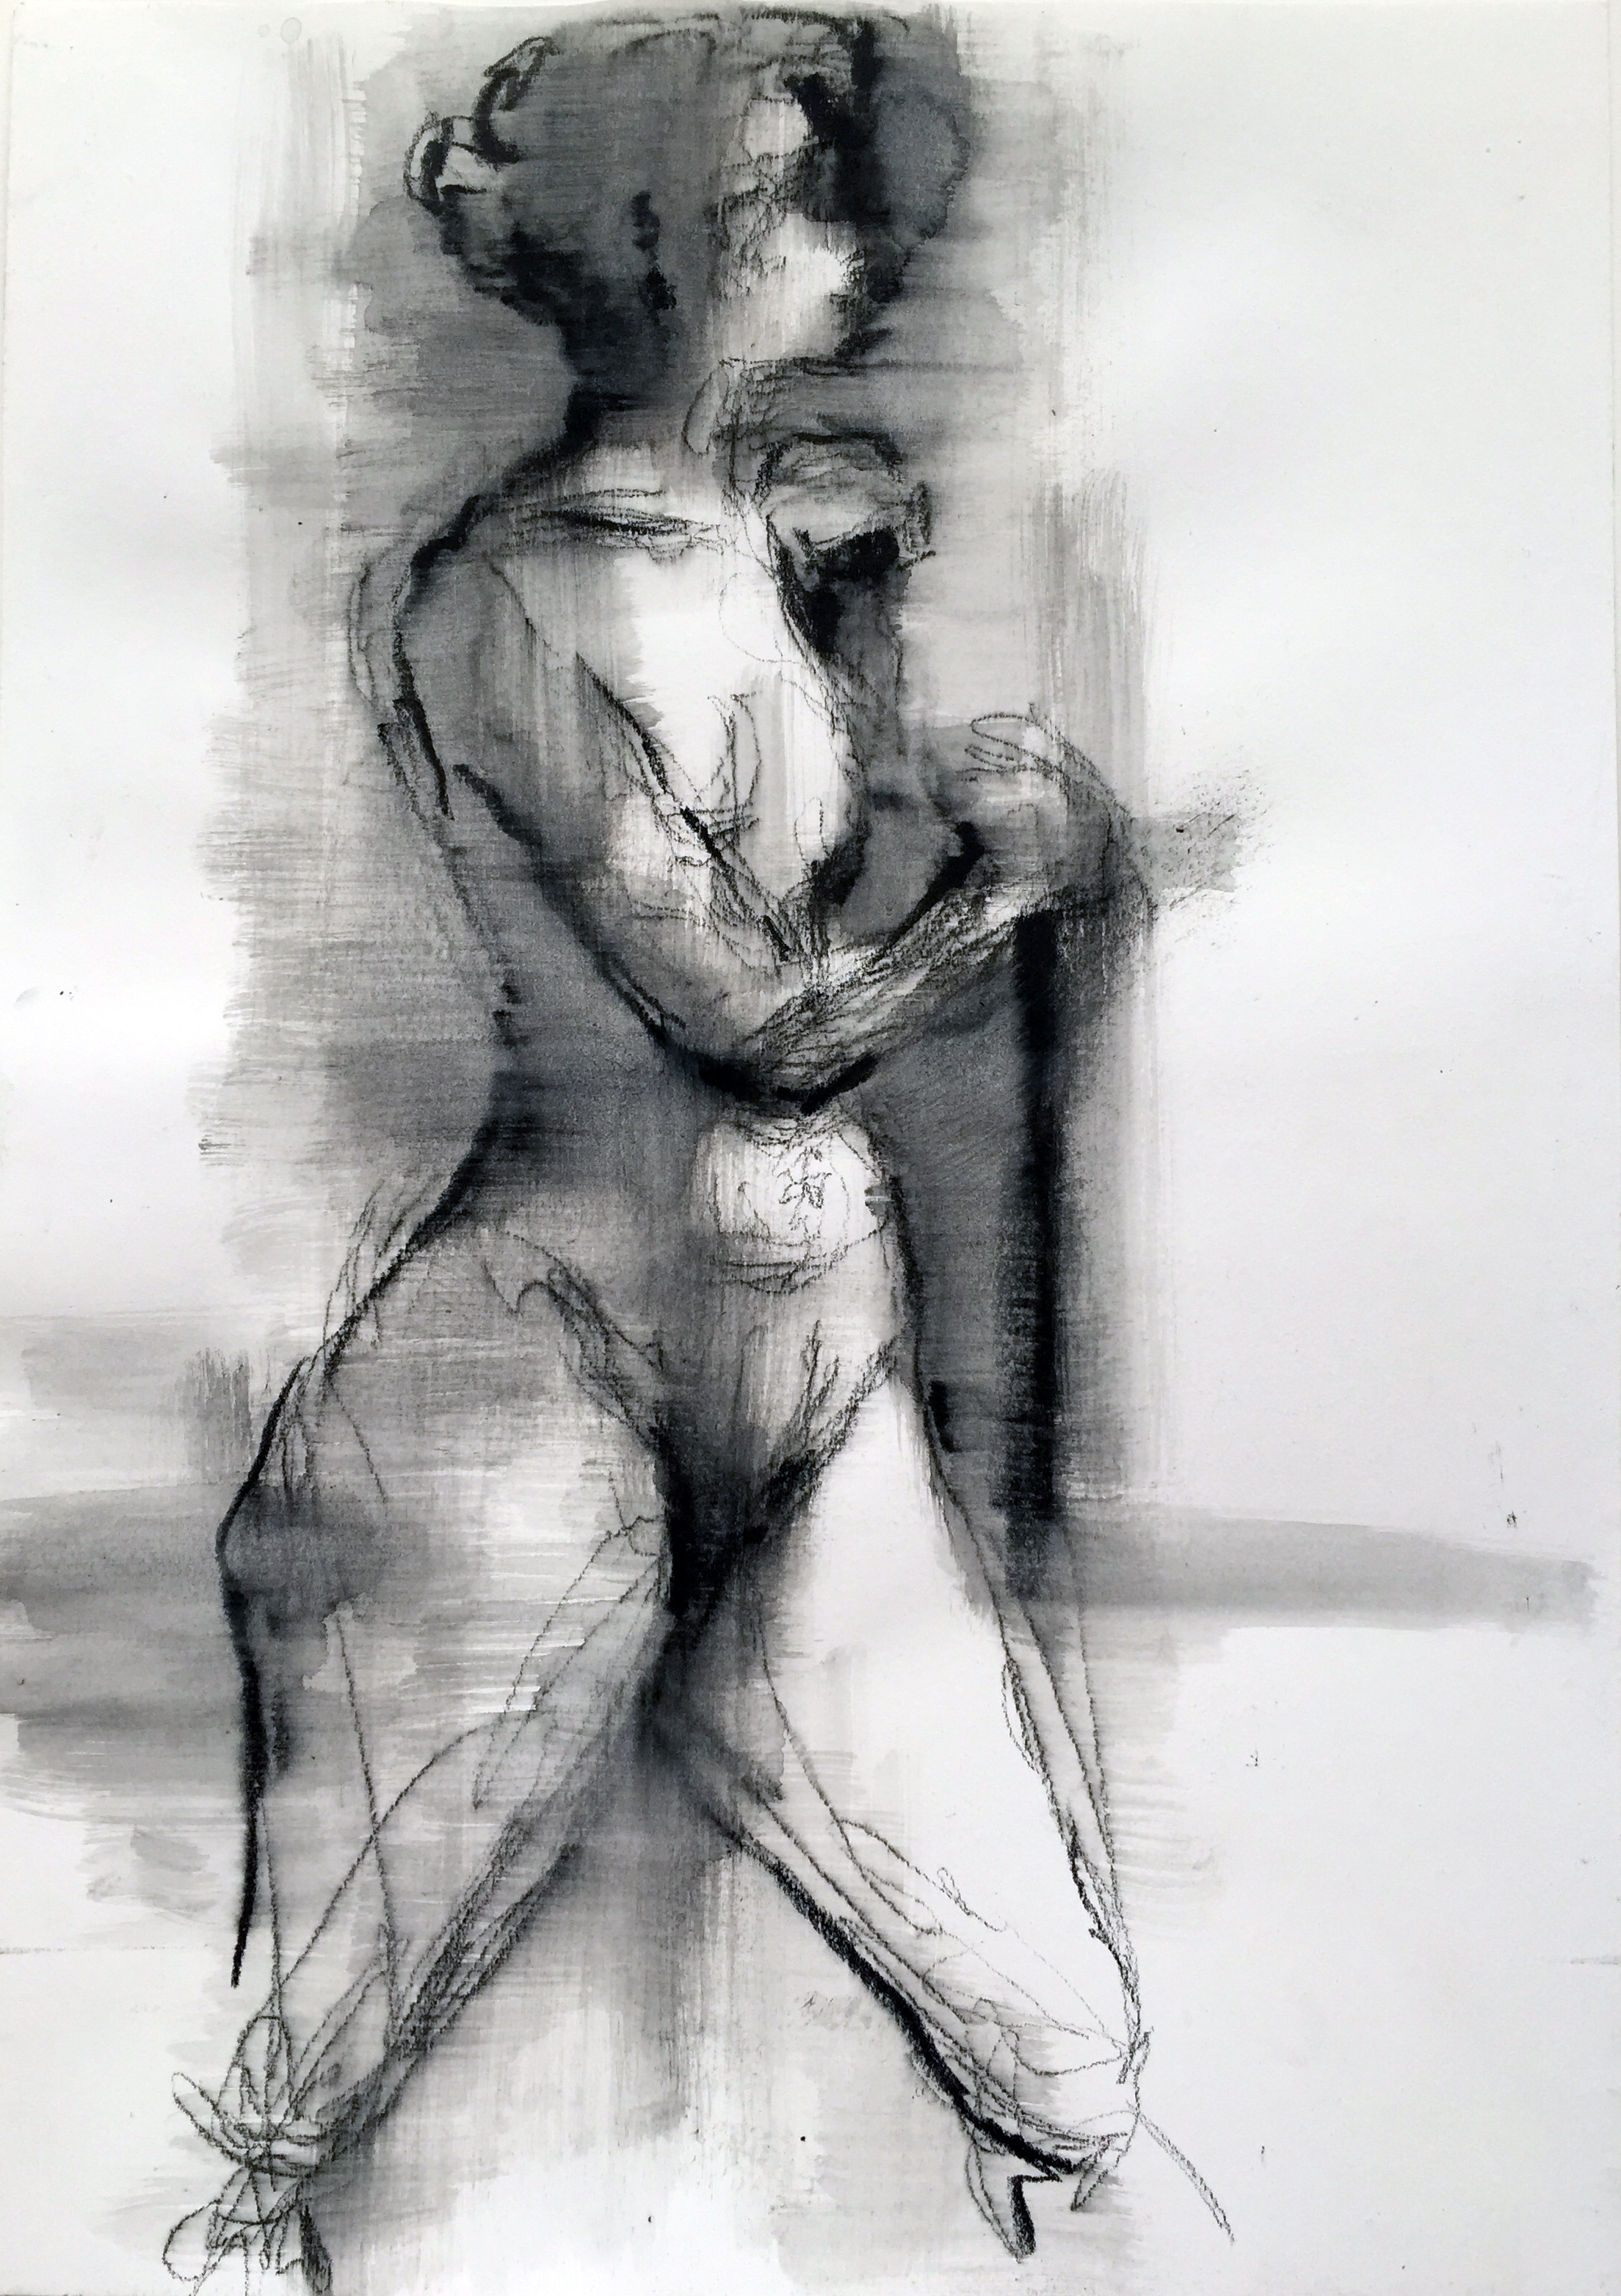   Nude 19  2016 Watercrayon on paper 16" x 11" 